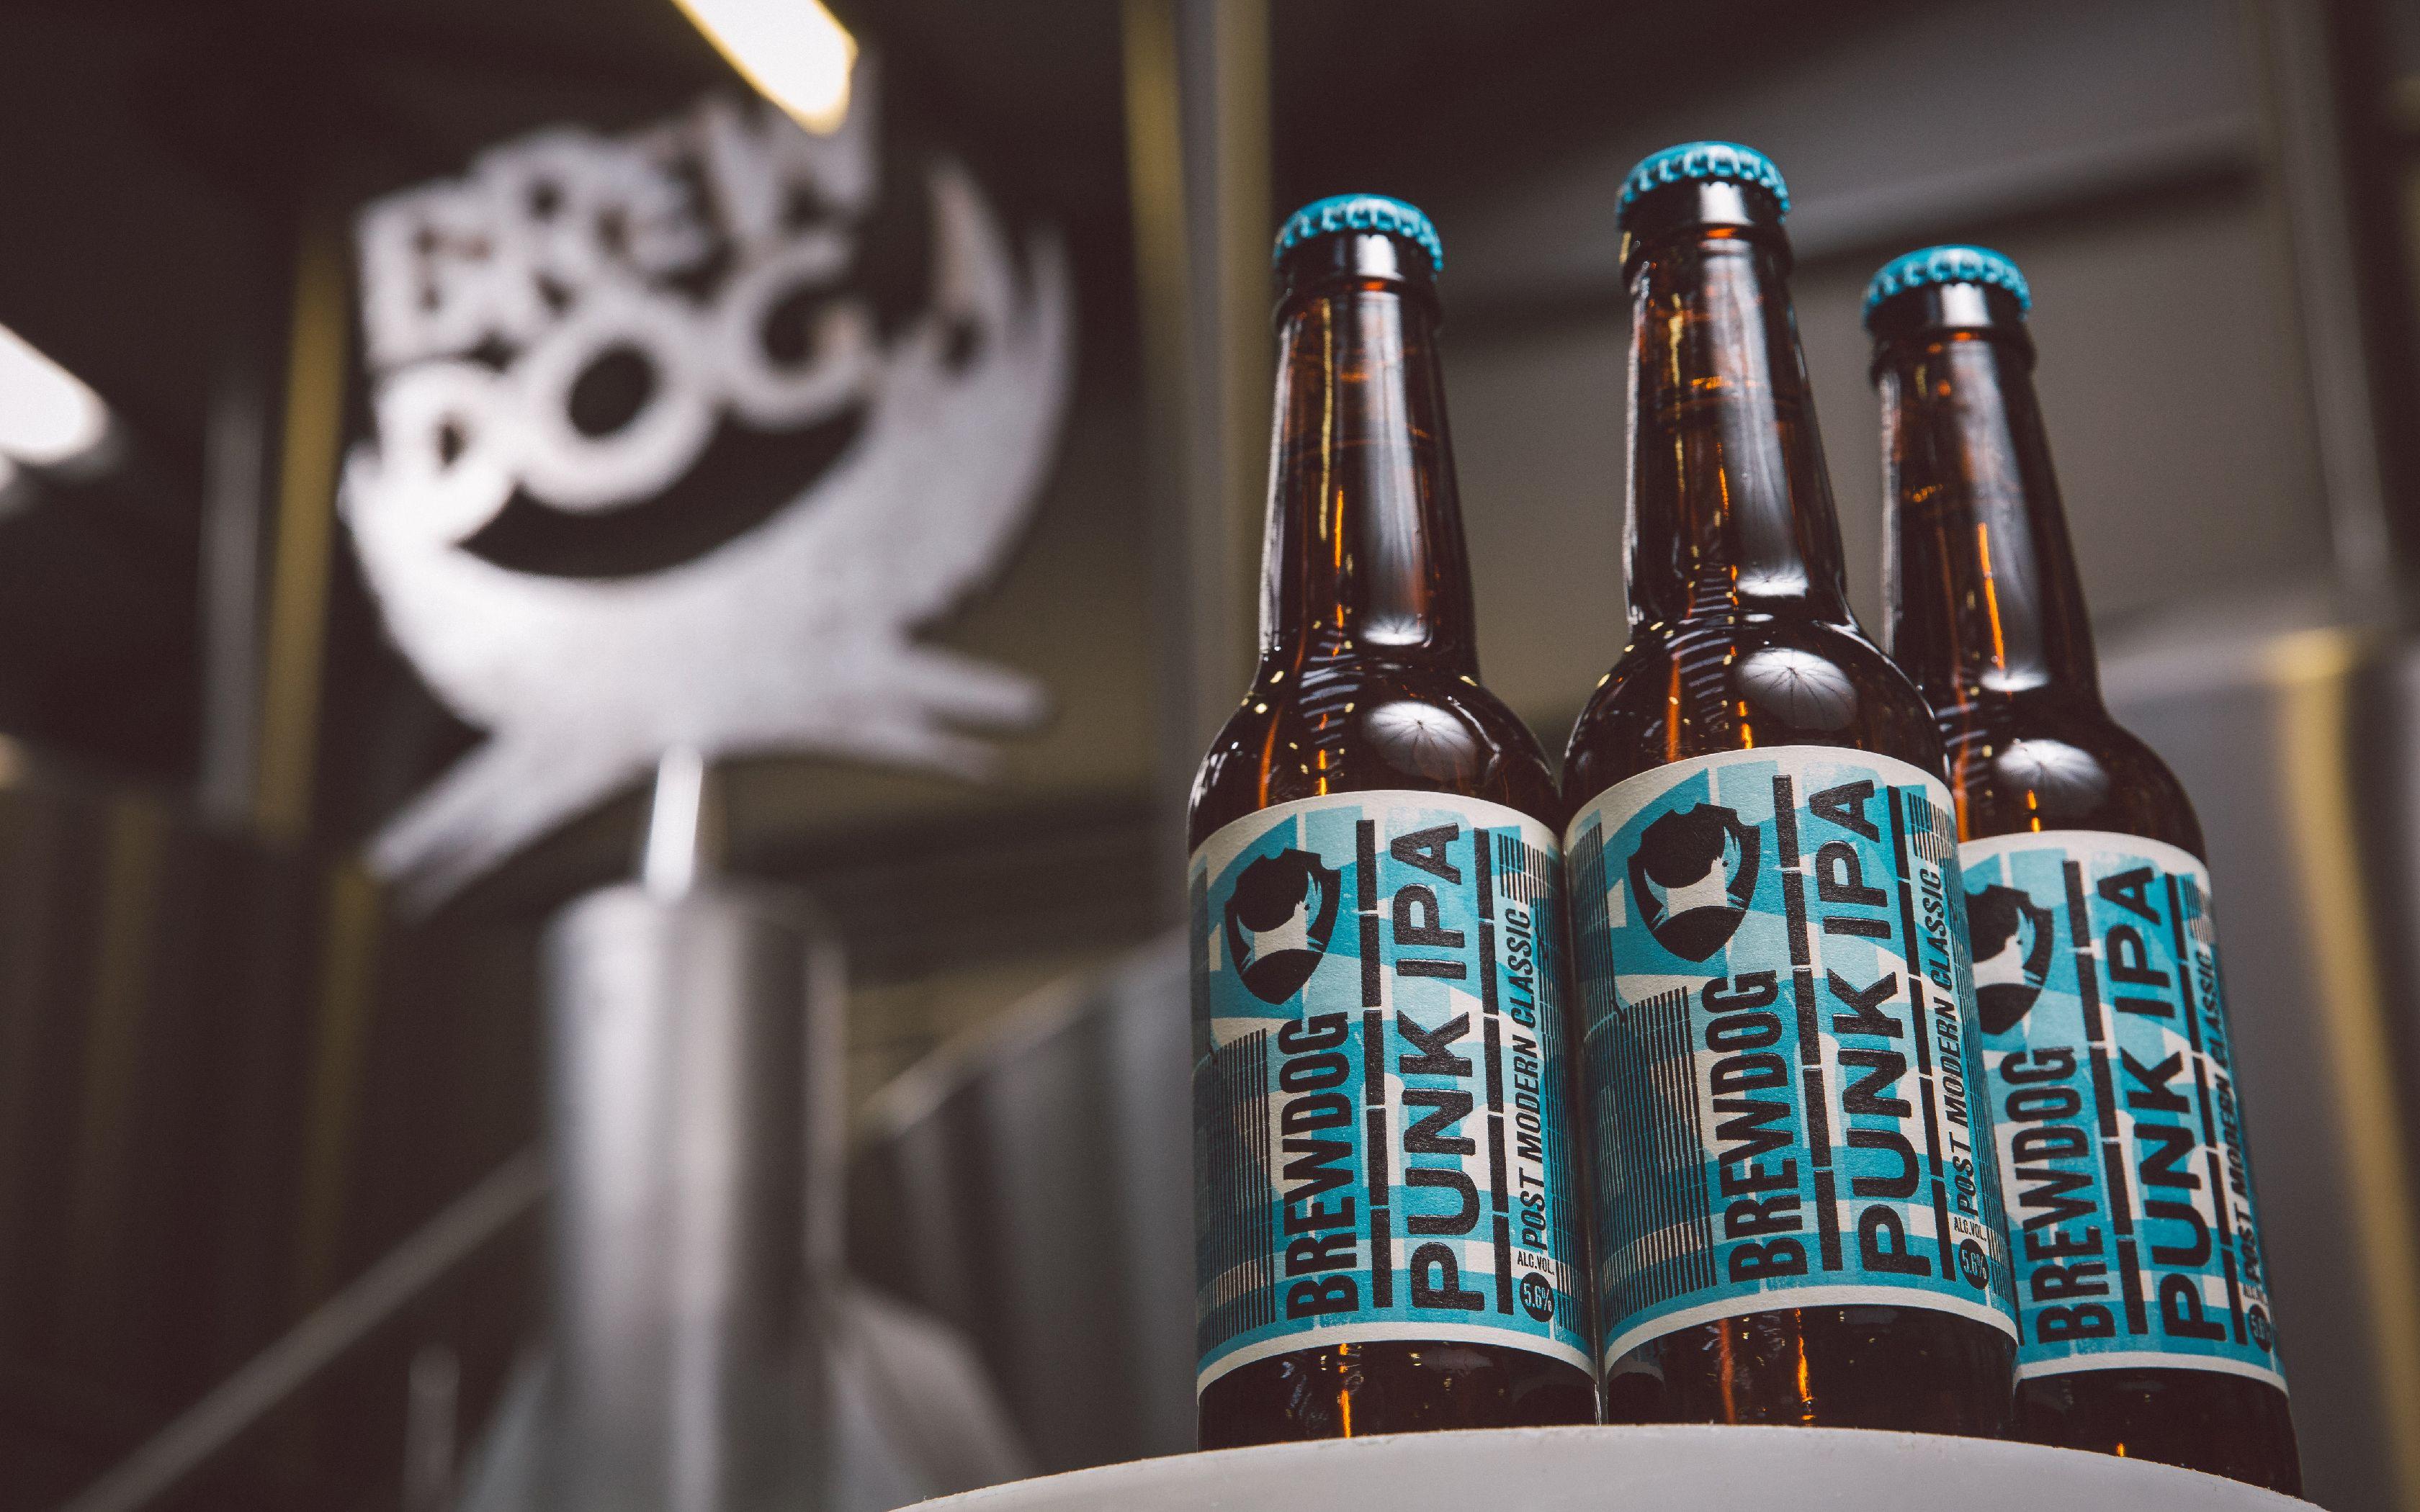 Brewdog is giving away 1 million free pints of beer, but there's a catch